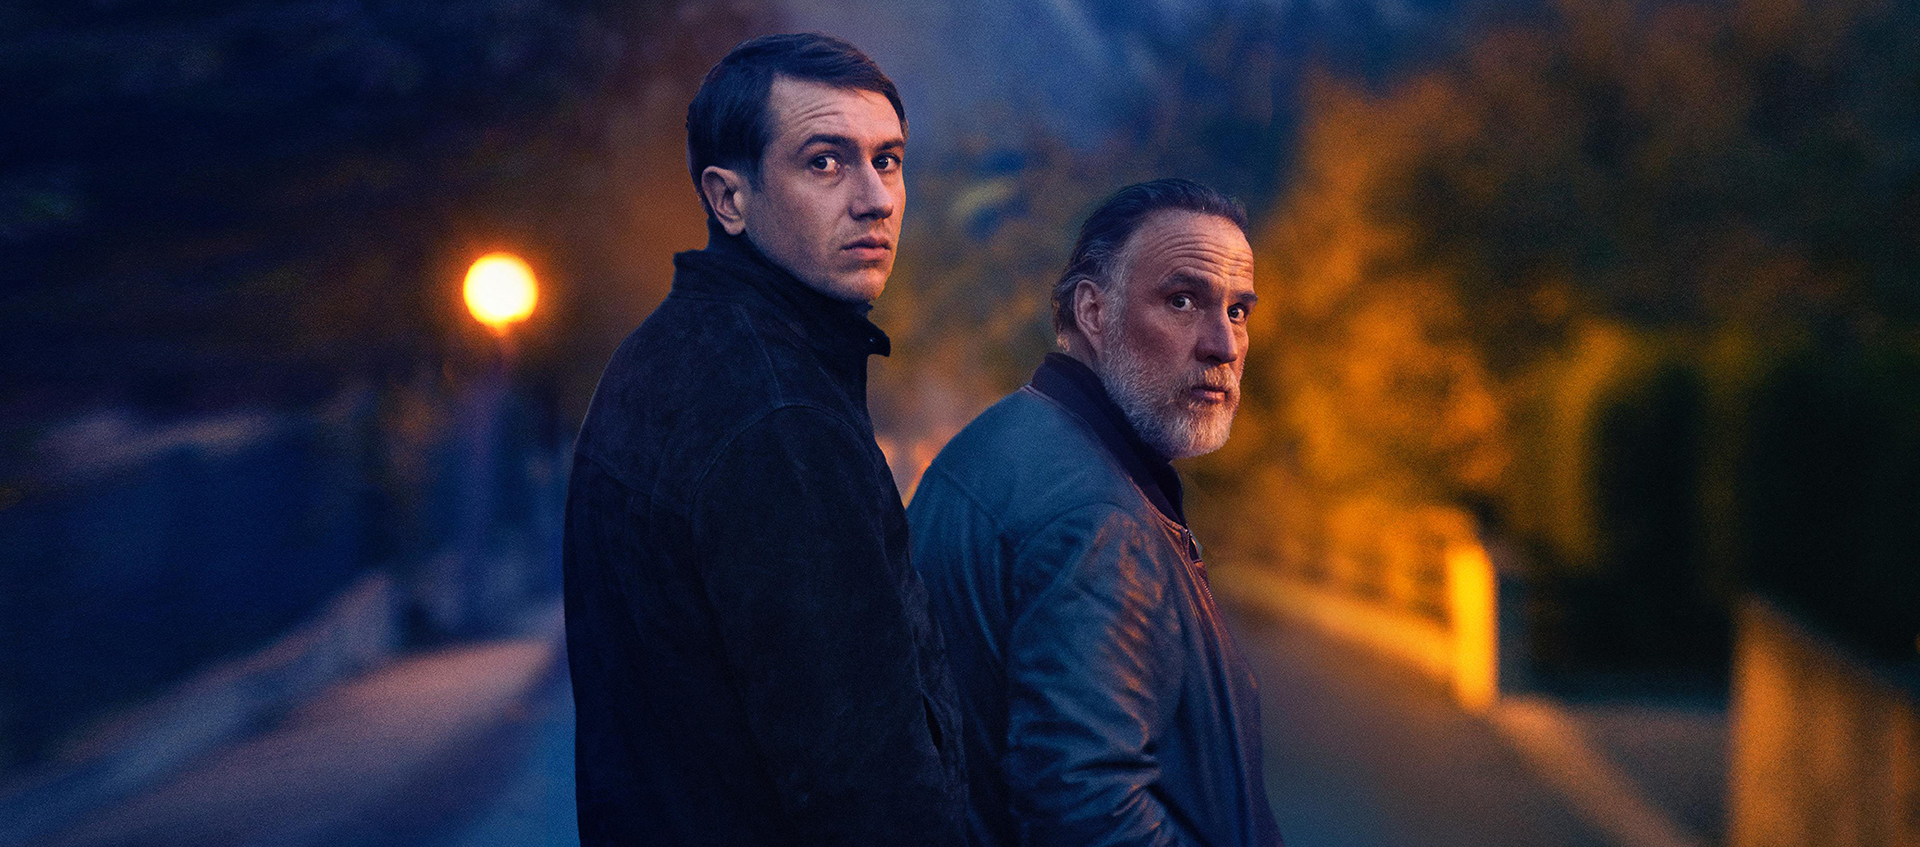 Two men, one tall and one shorter with a gray beard, are standing in the middle of the street at night, turning back to look over their shoulders. 